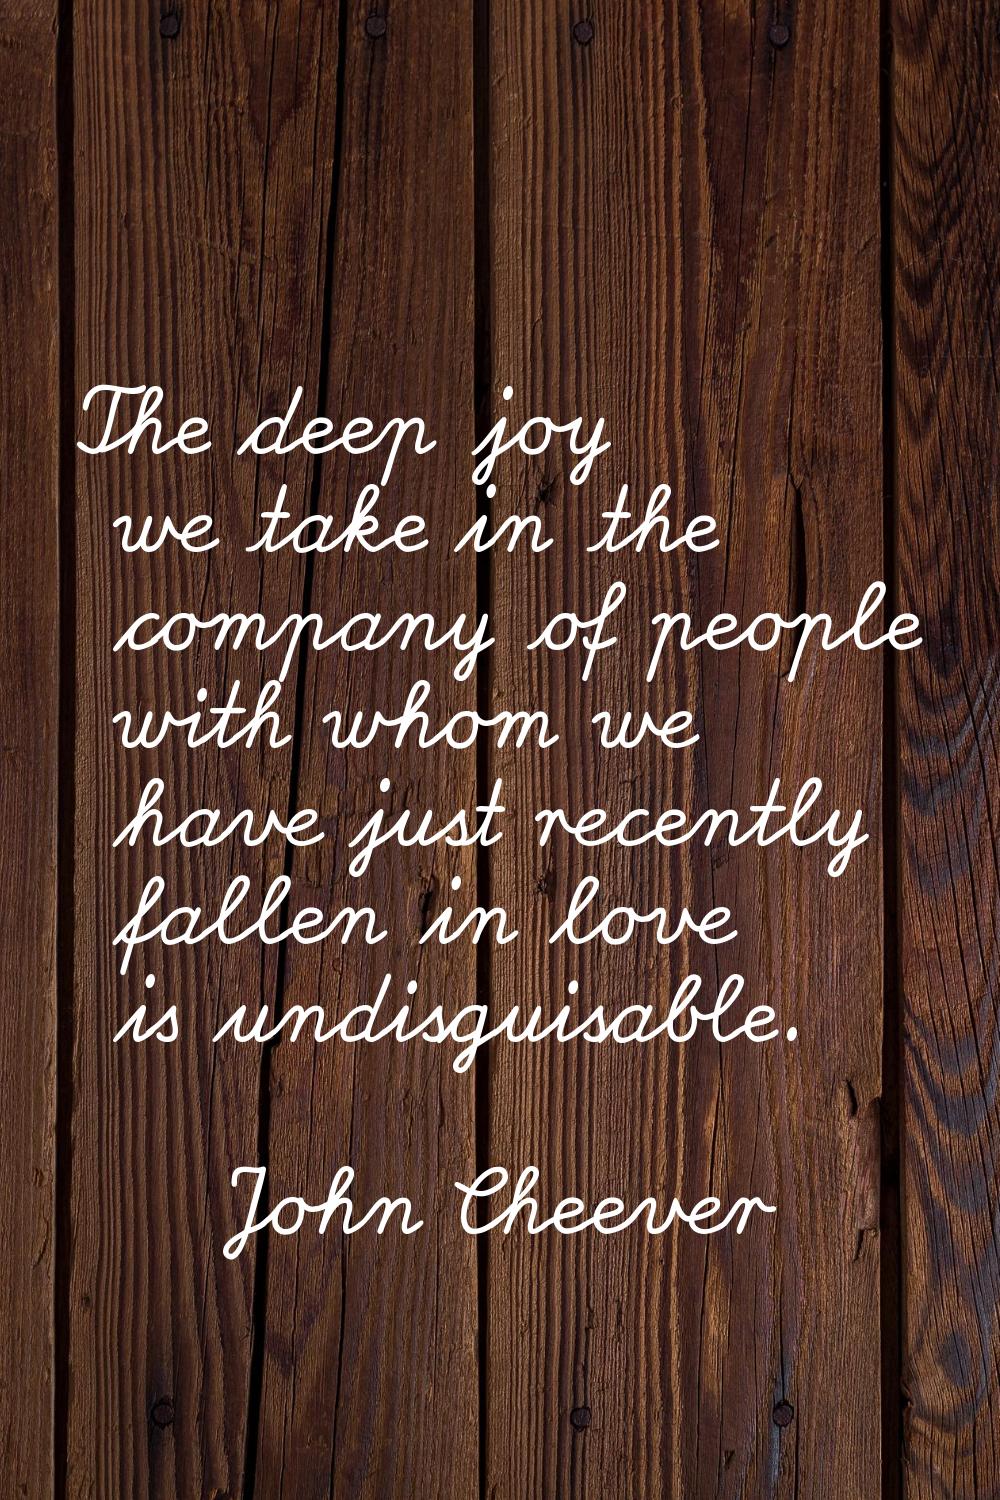 The deep joy we take in the company of people with whom we have just recently fallen in love is und